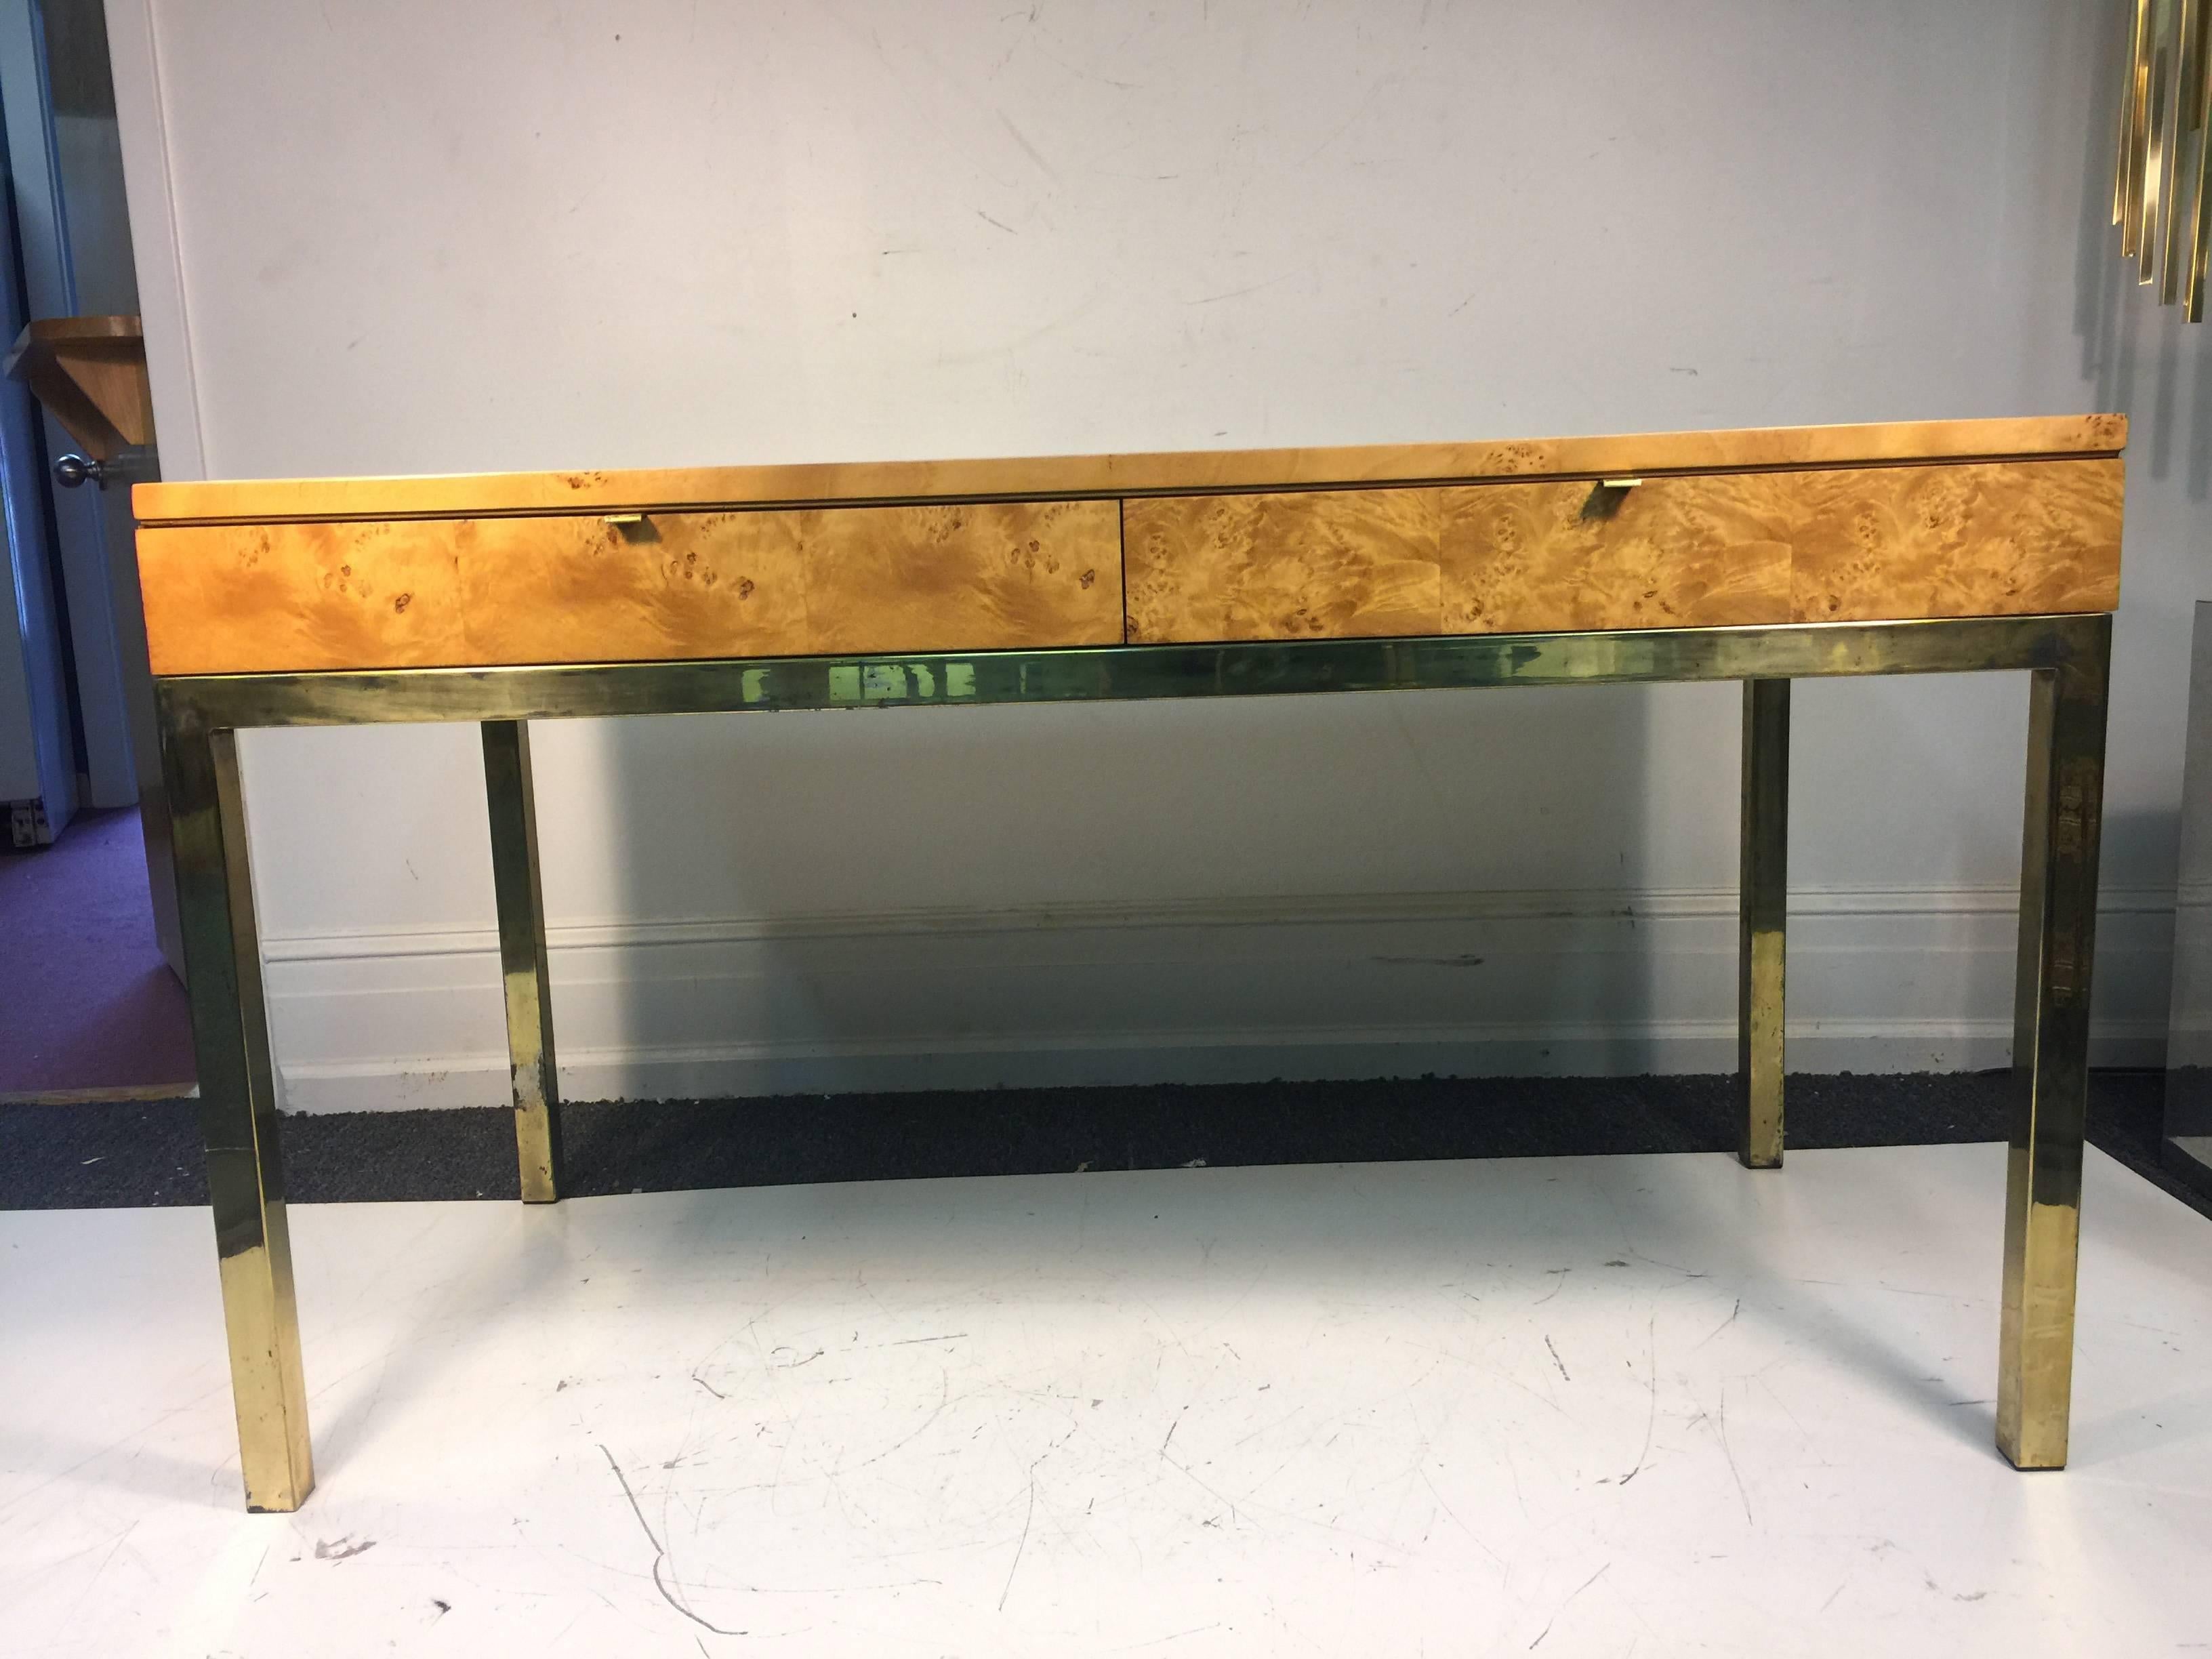 A magnificent Milo Baughman burl wood desk, or console table with two drawers, and beautiful brass base, circa 1970. Good vintage condition with age appropriate wear and patina.